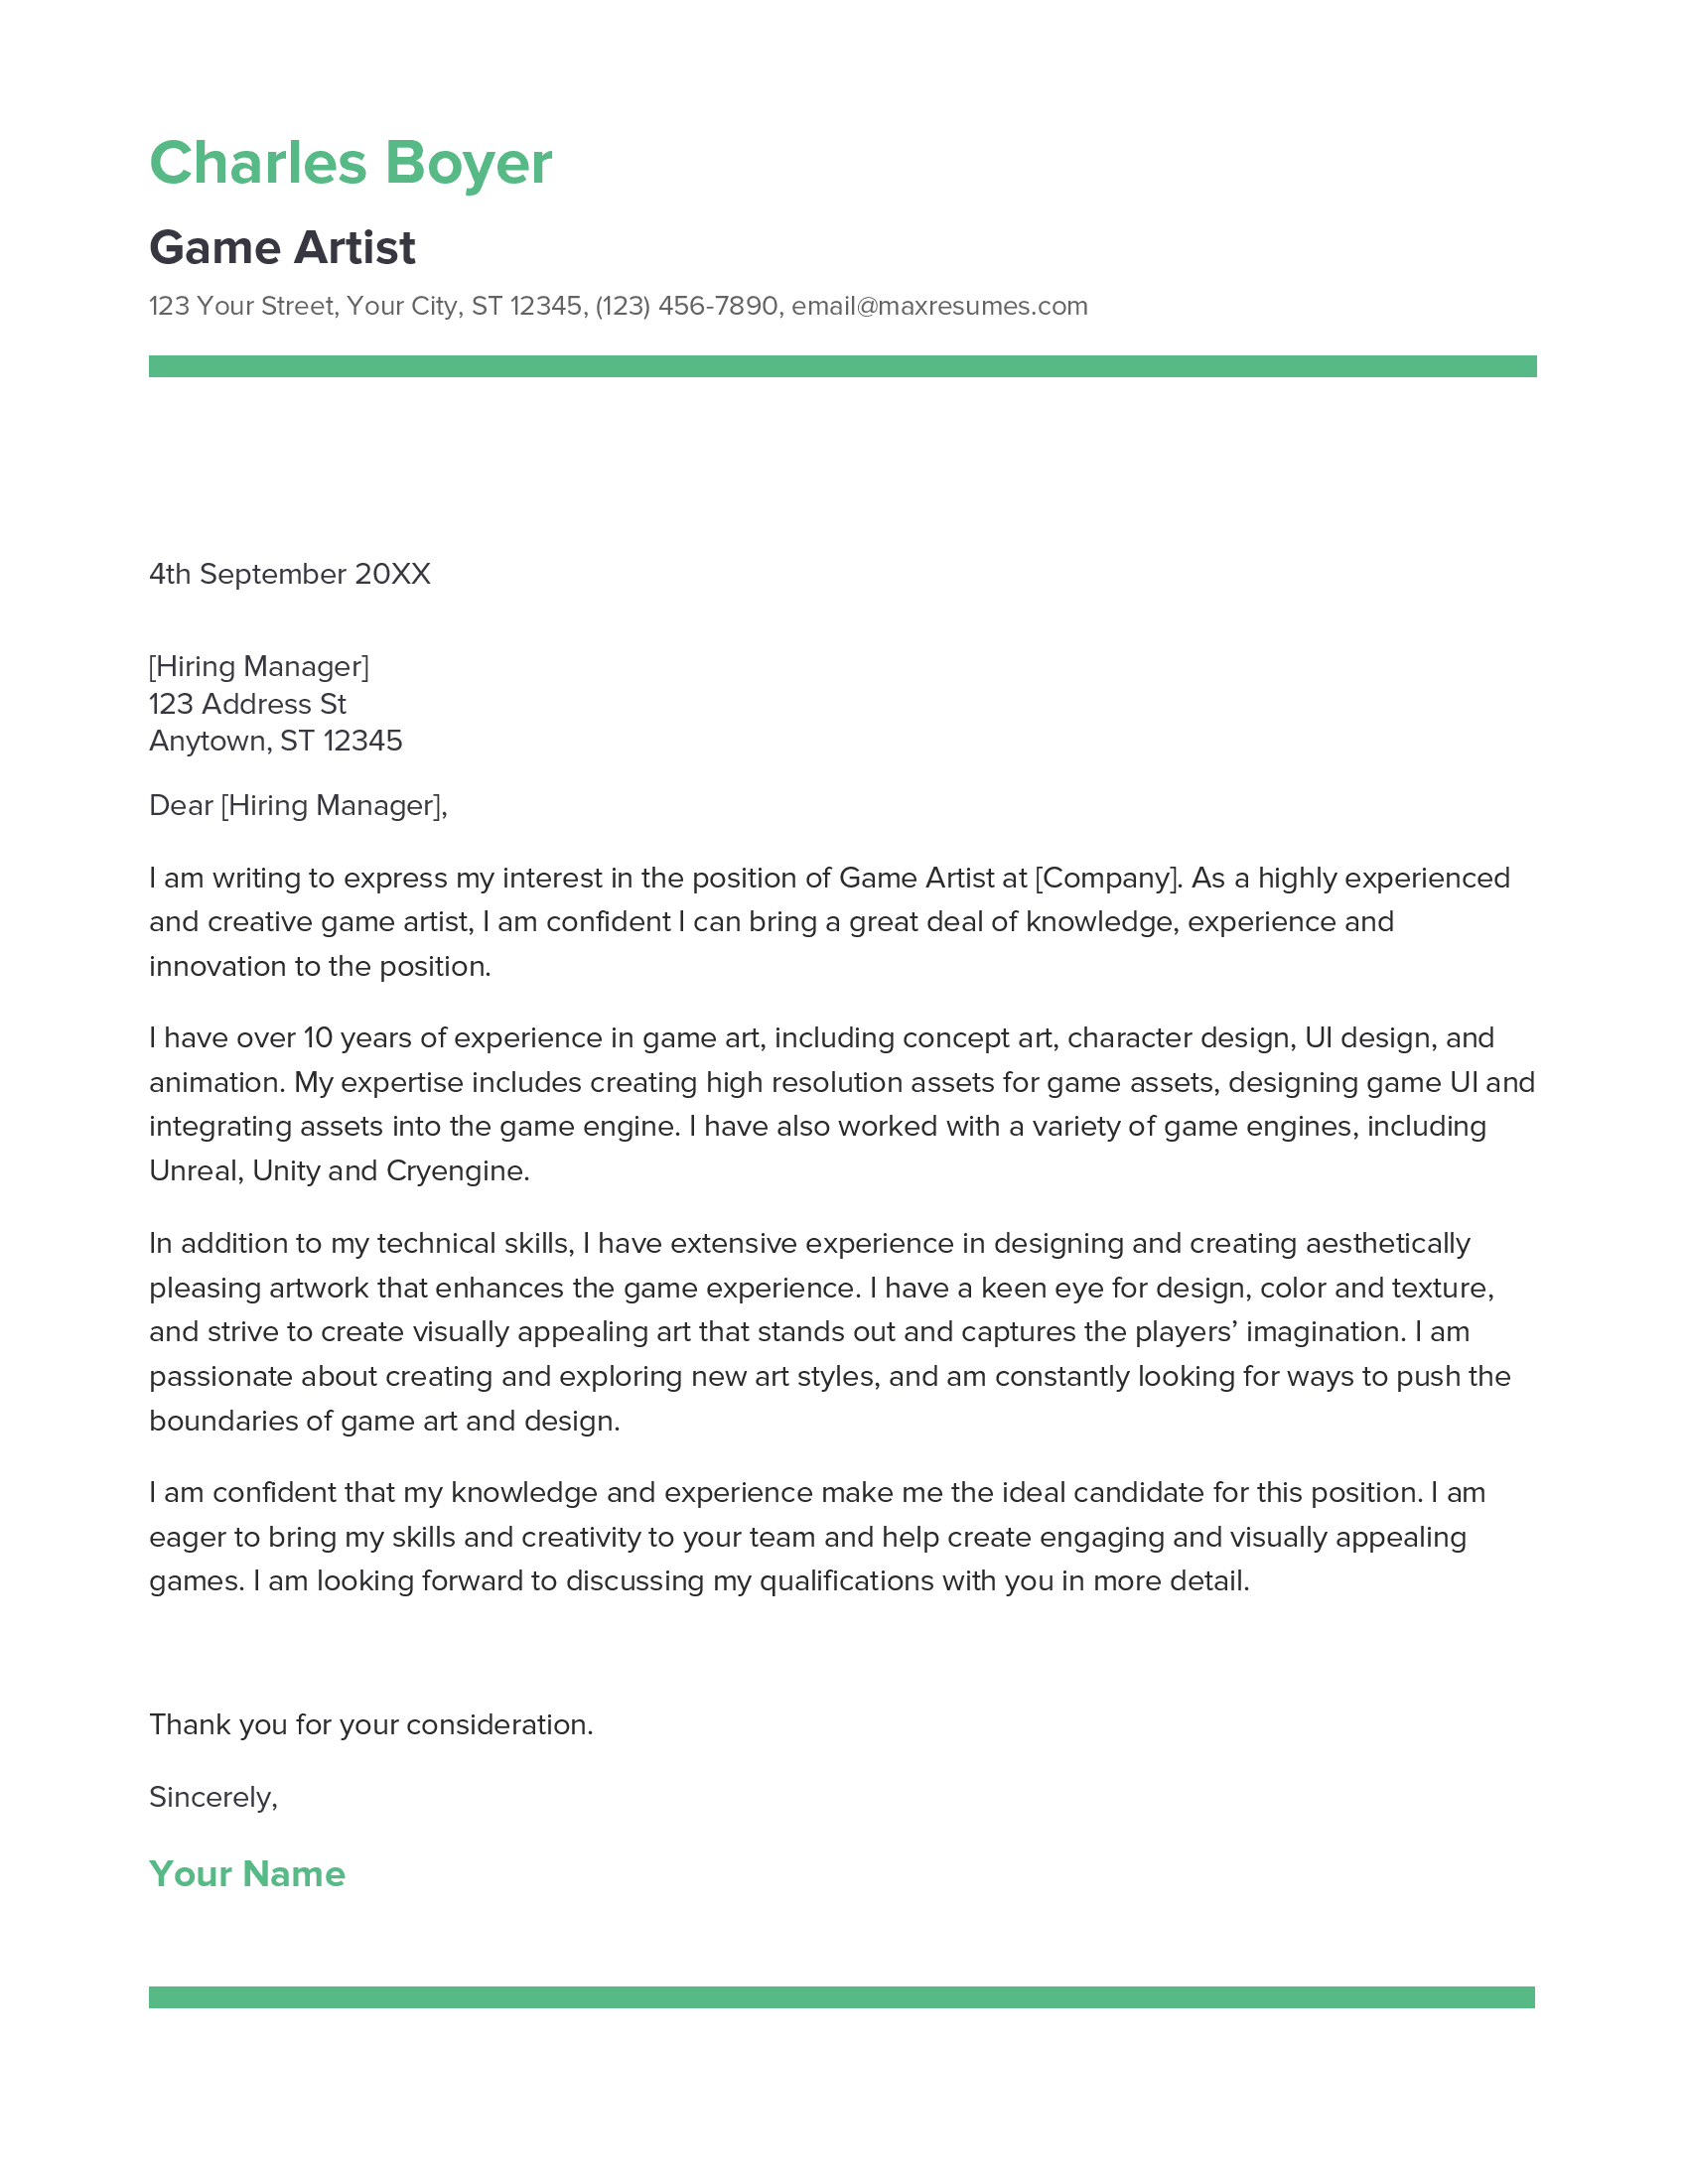 Game Artist Cover Letter Example